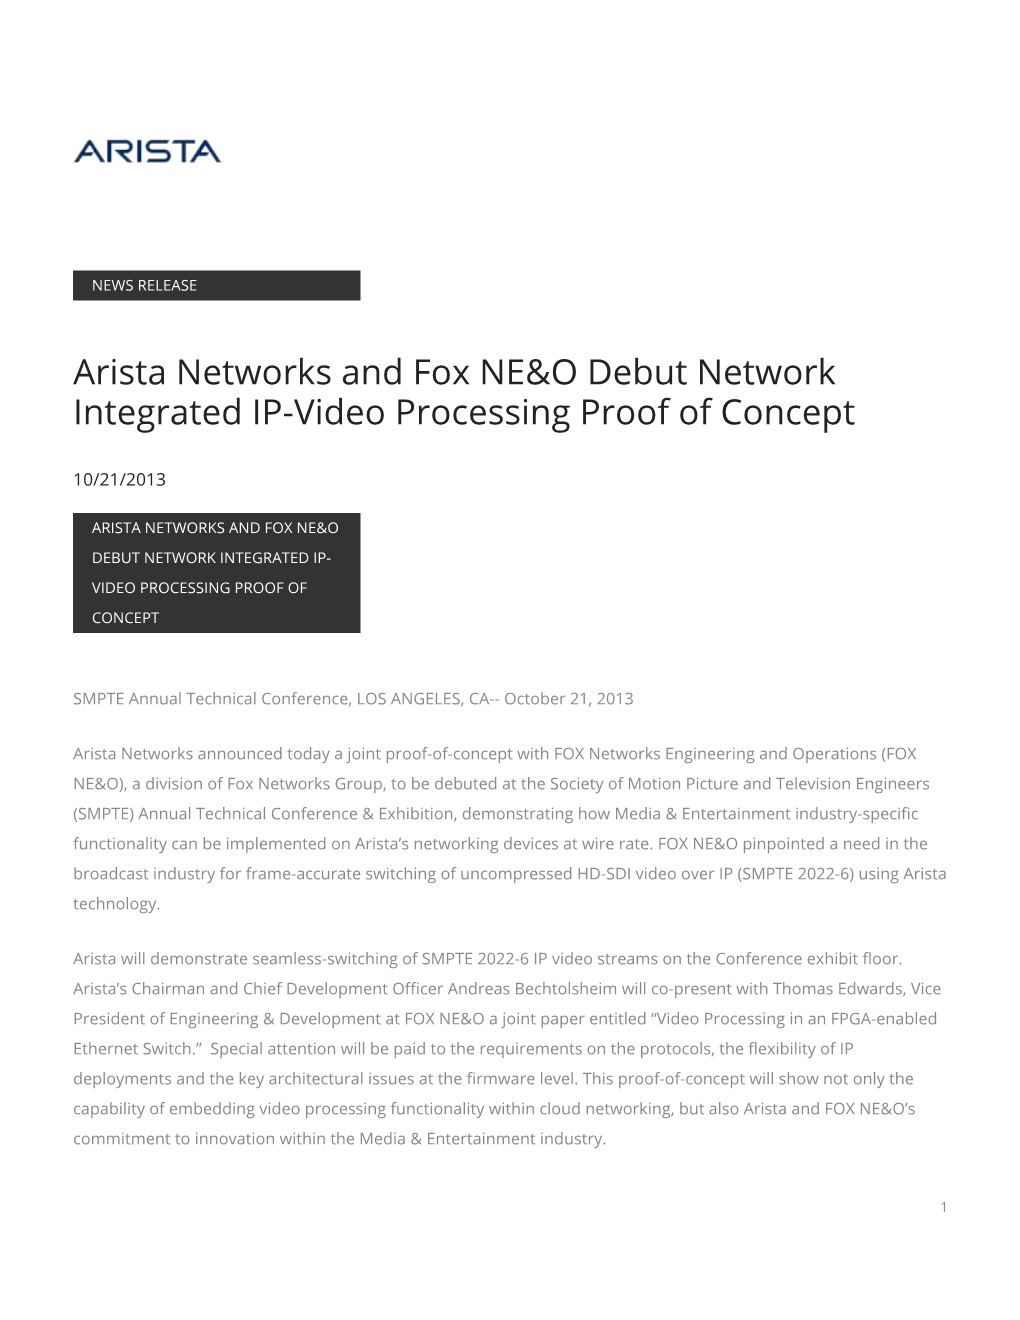 Arista Networks and Fox NE&O Debut Network Integrated IP-Video